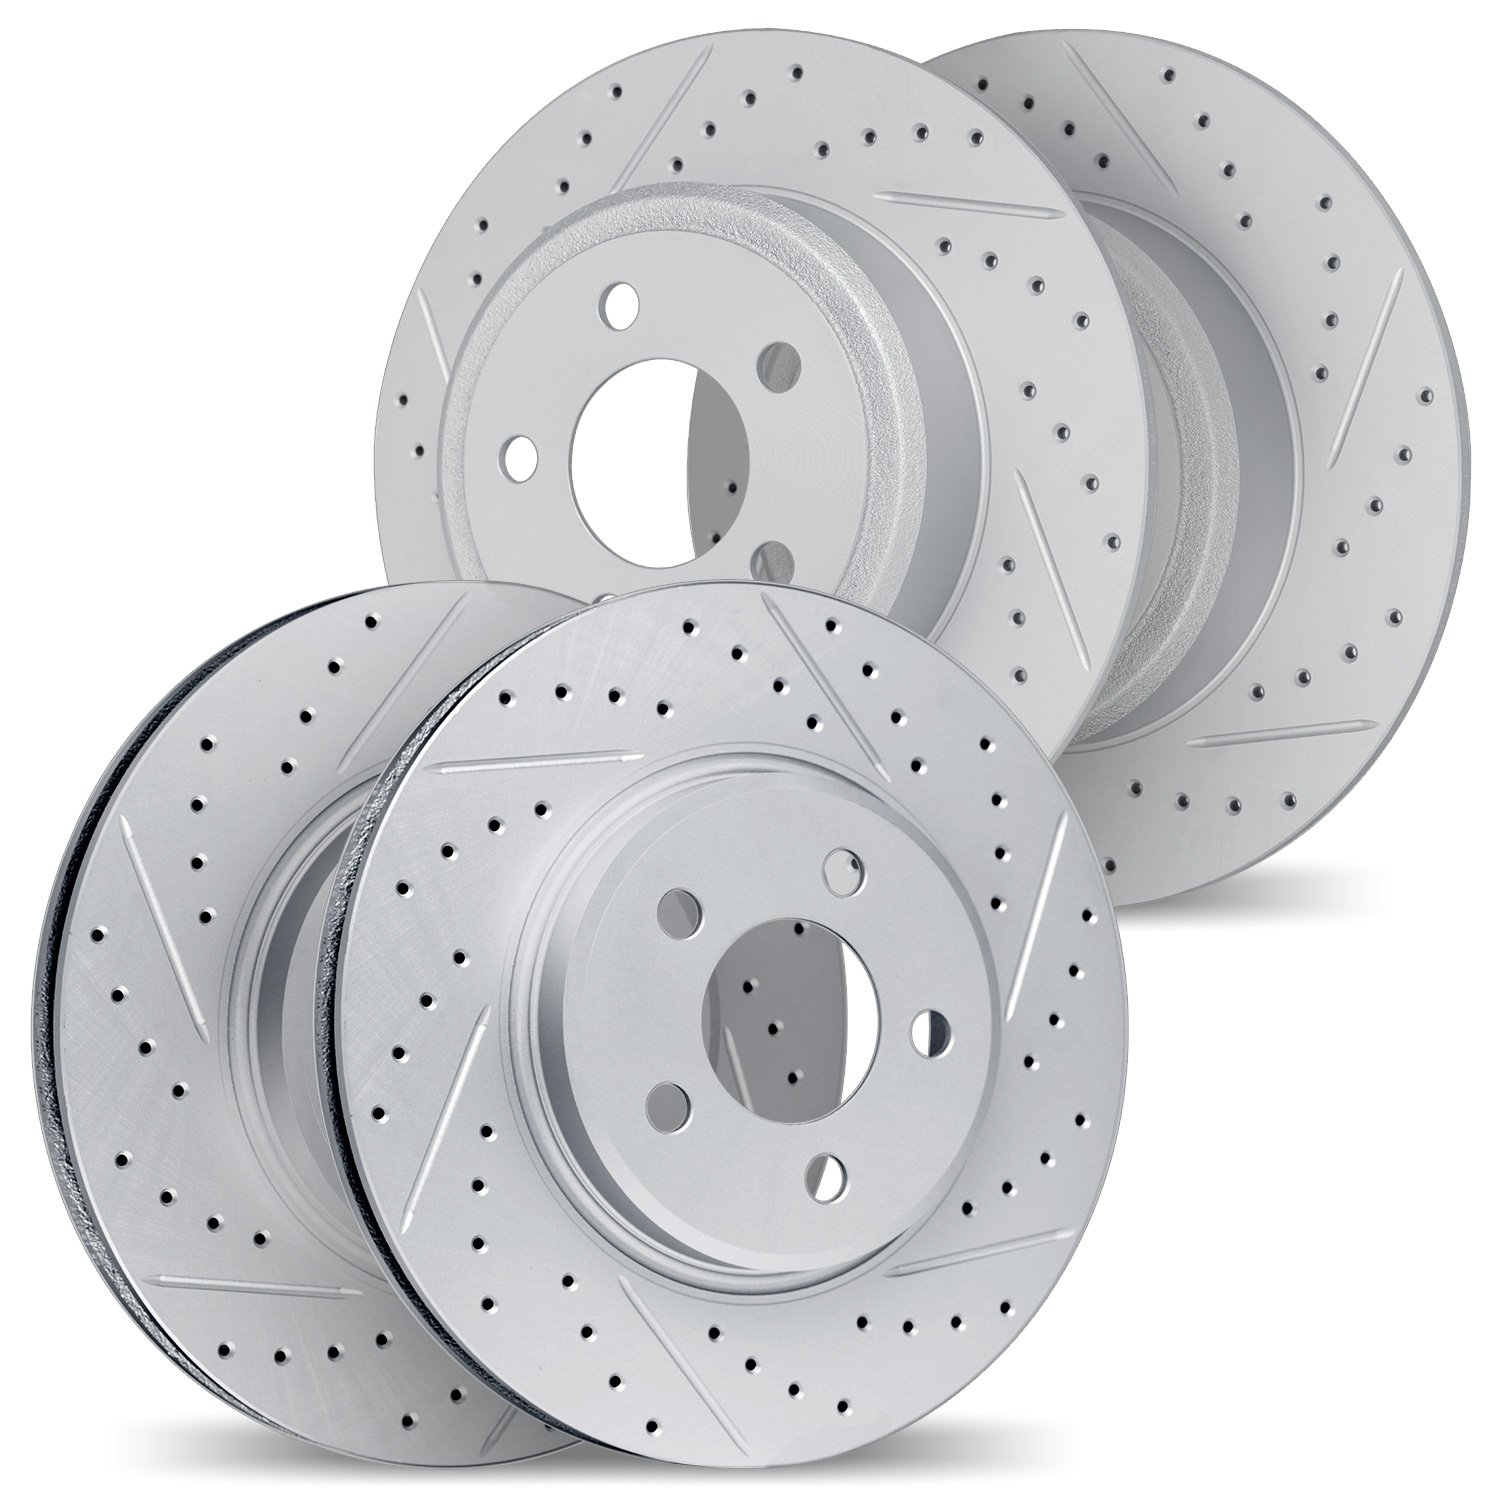 2004-75025 Geoperformance Drilled/Slotted Brake Rotors, Fits Select Lexus/Toyota/Scion, Position: Front and Rear